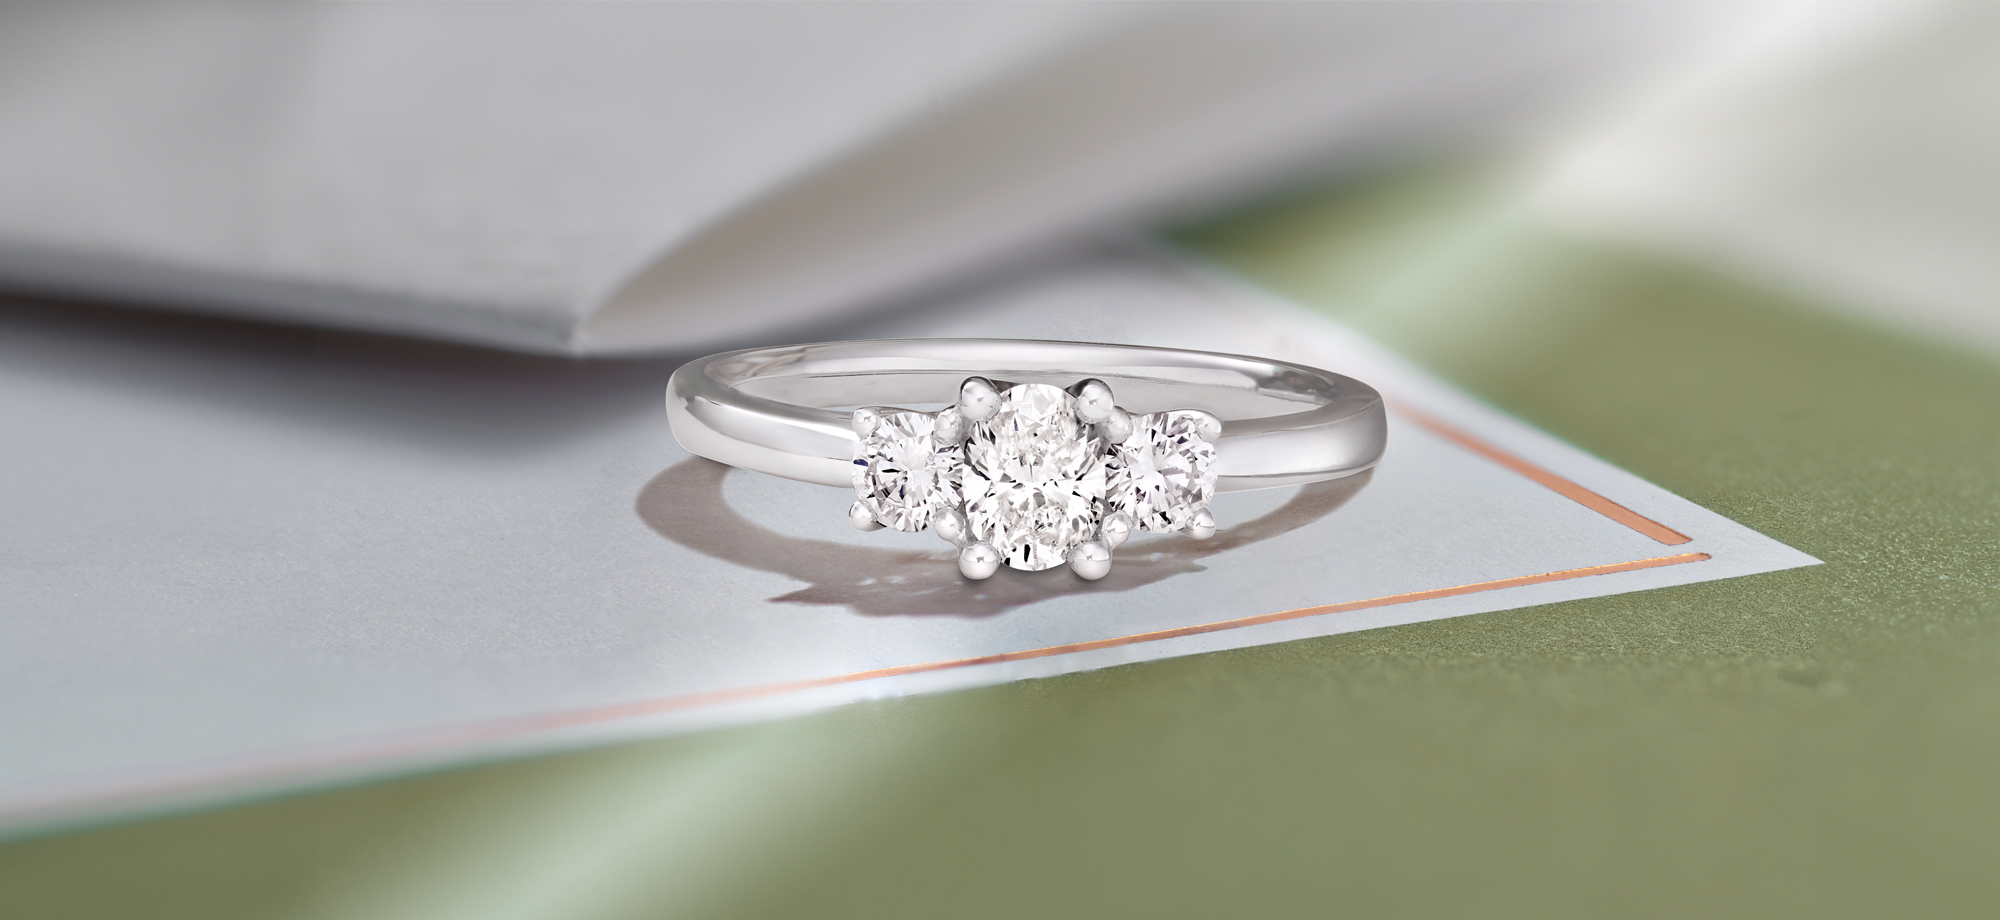 Diamond Engagement Rings - Your Questions Answered – All Diamond